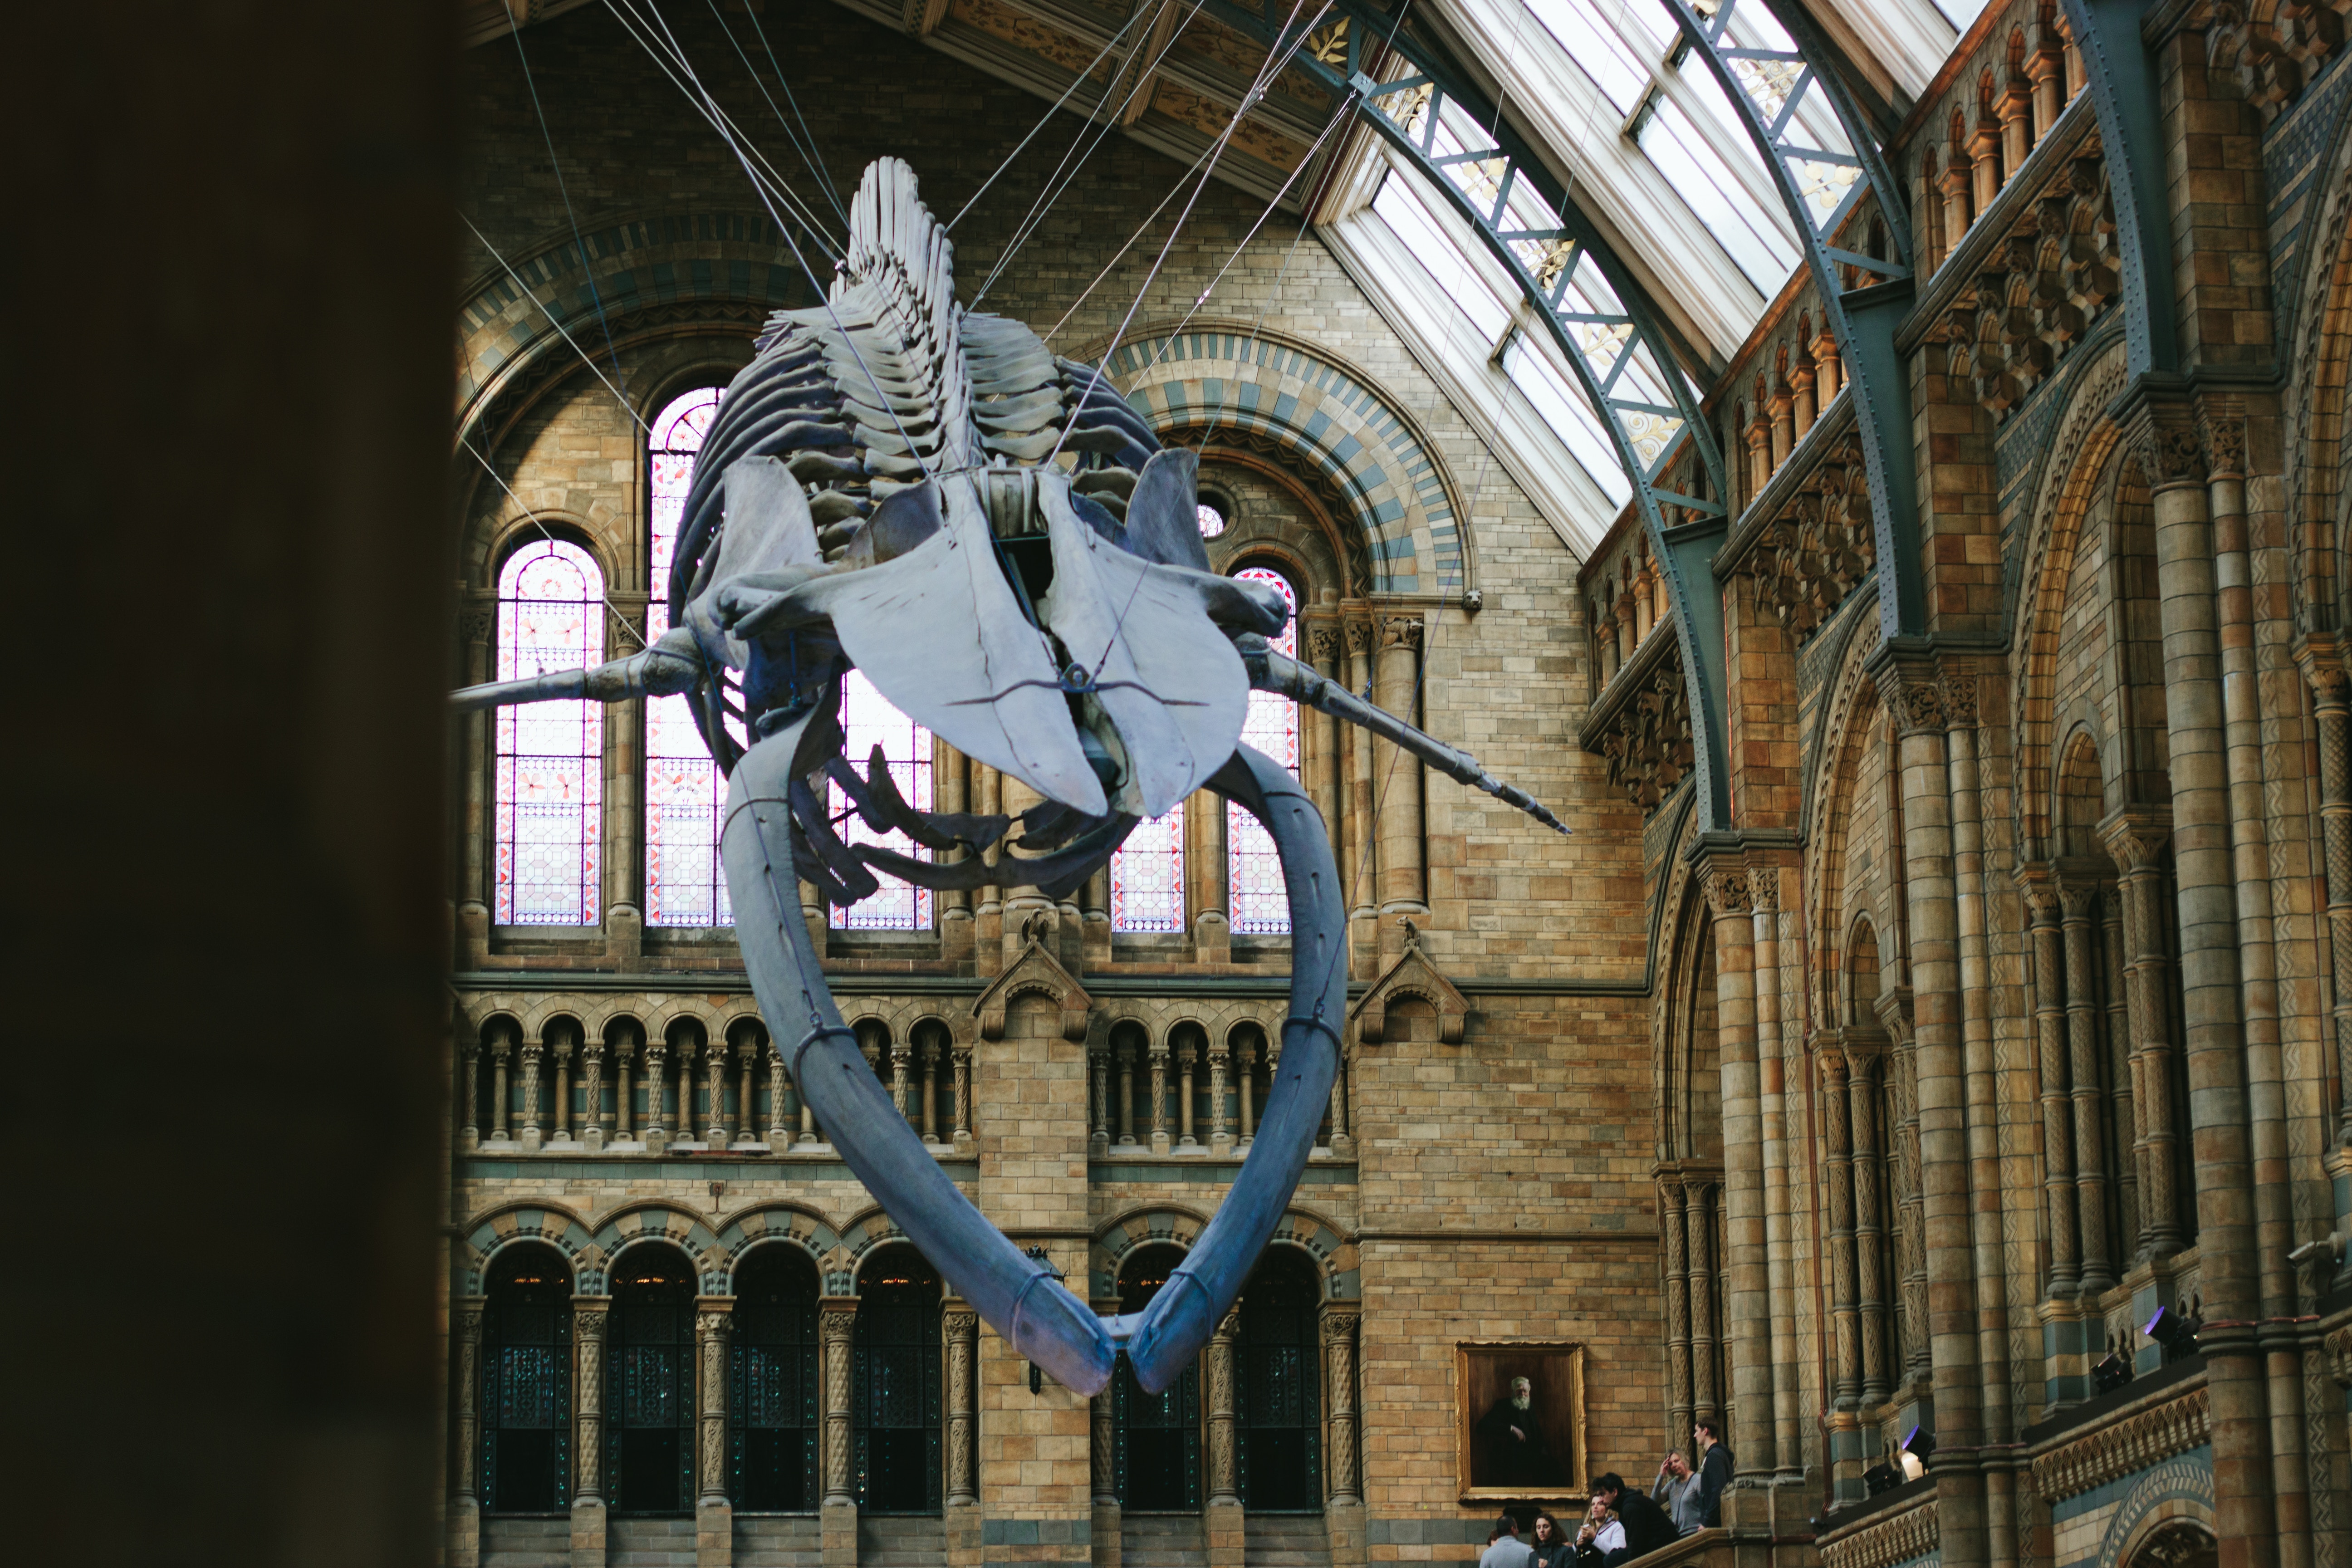 The whale at the Natural History Museum